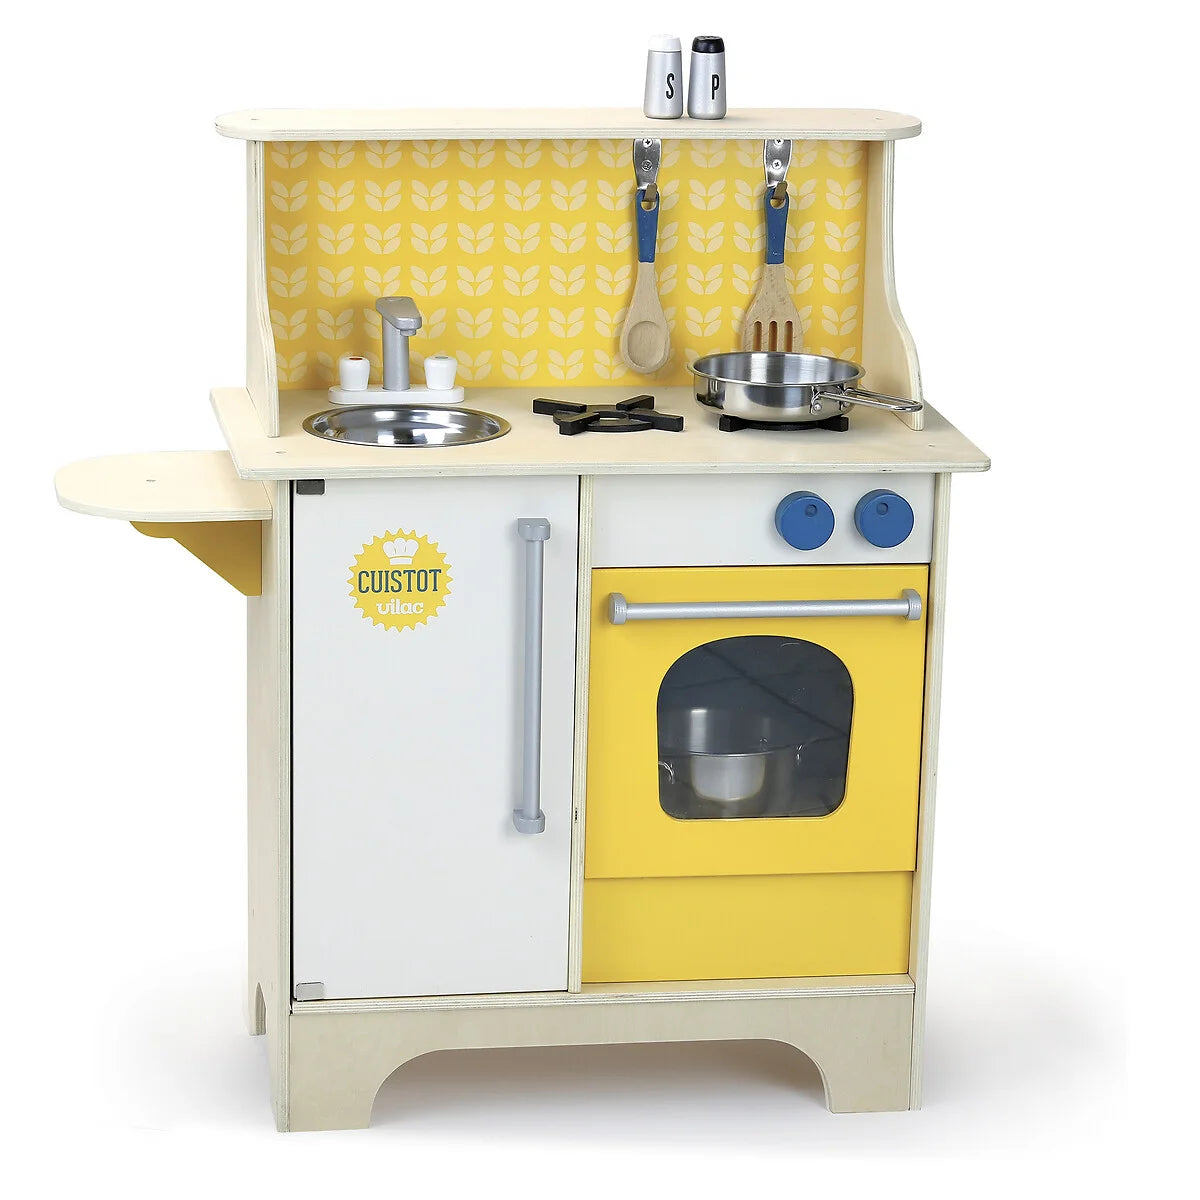 Cuisine Cuistot Moutarde - Play Kitchen by Vilac